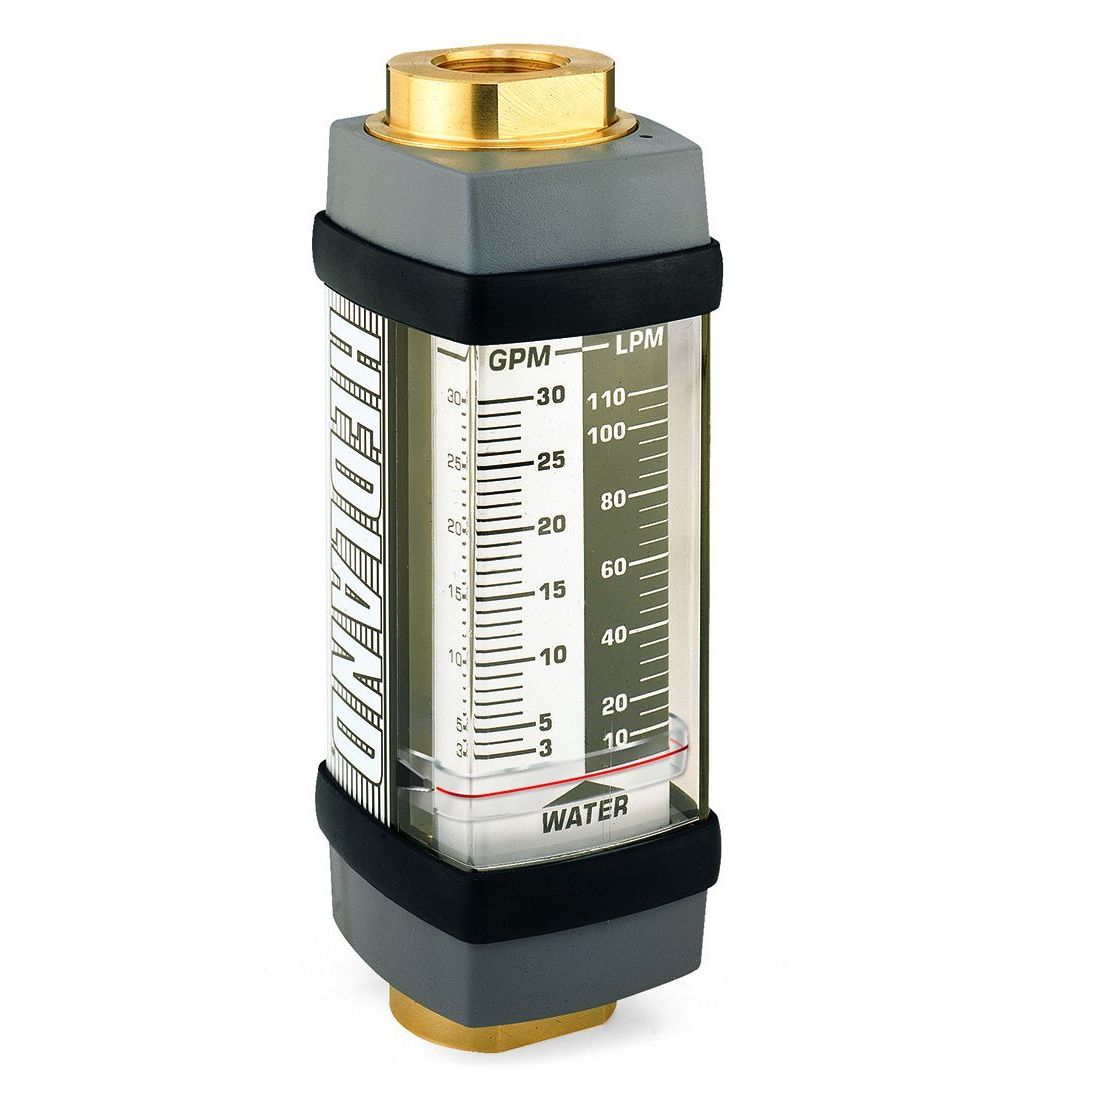 H854B-150 : Hedland 3500psi Brass Flow Meter for Water, #20 SAE (1.25), 10 to 150 GPM